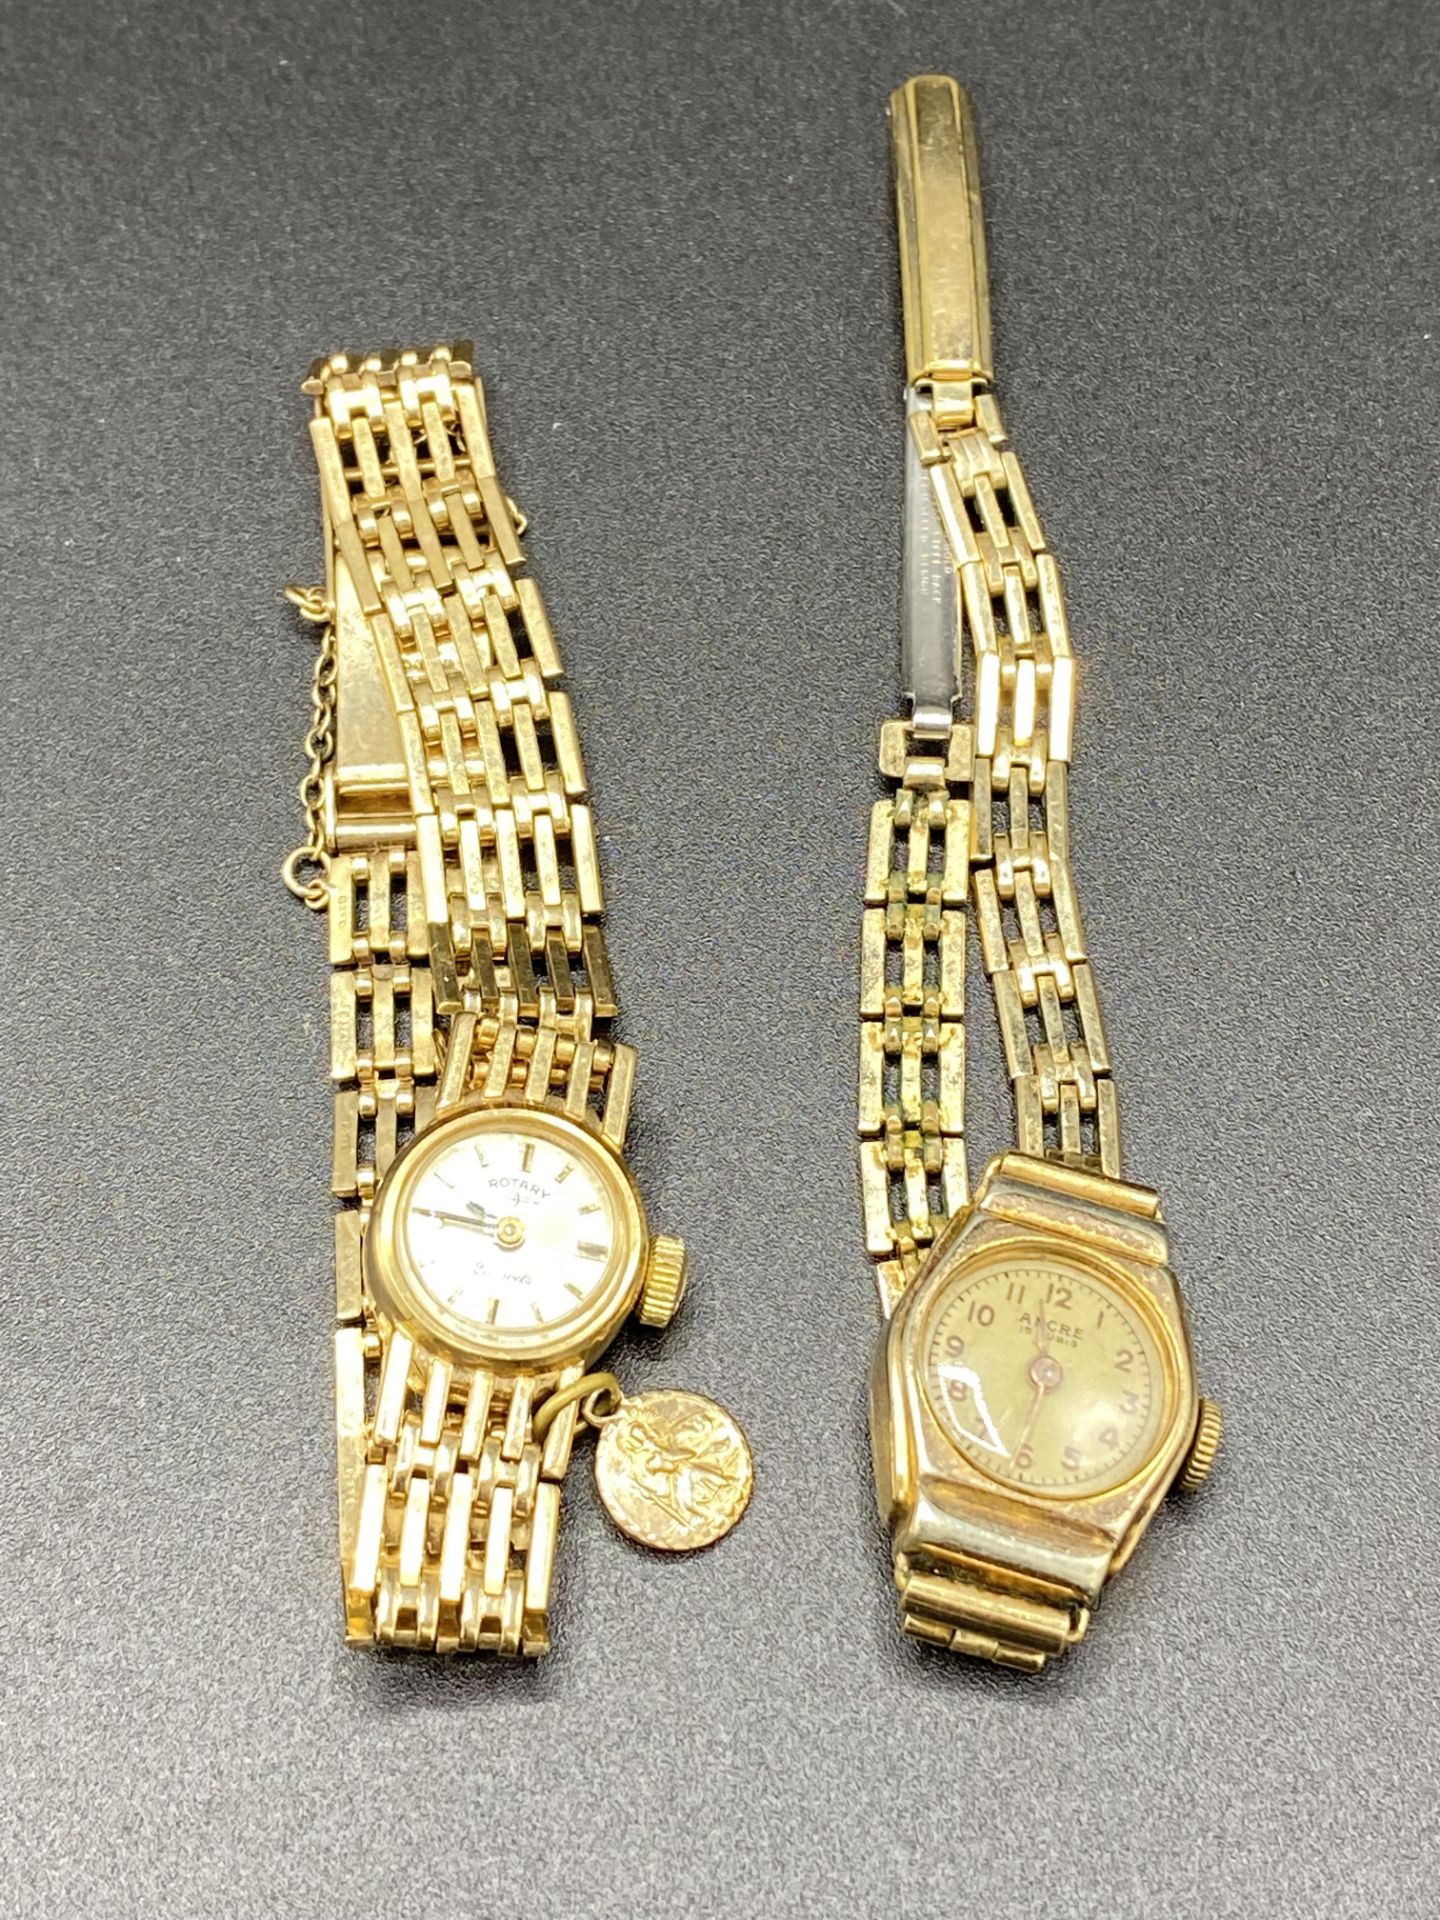 Two ladies wrist watches